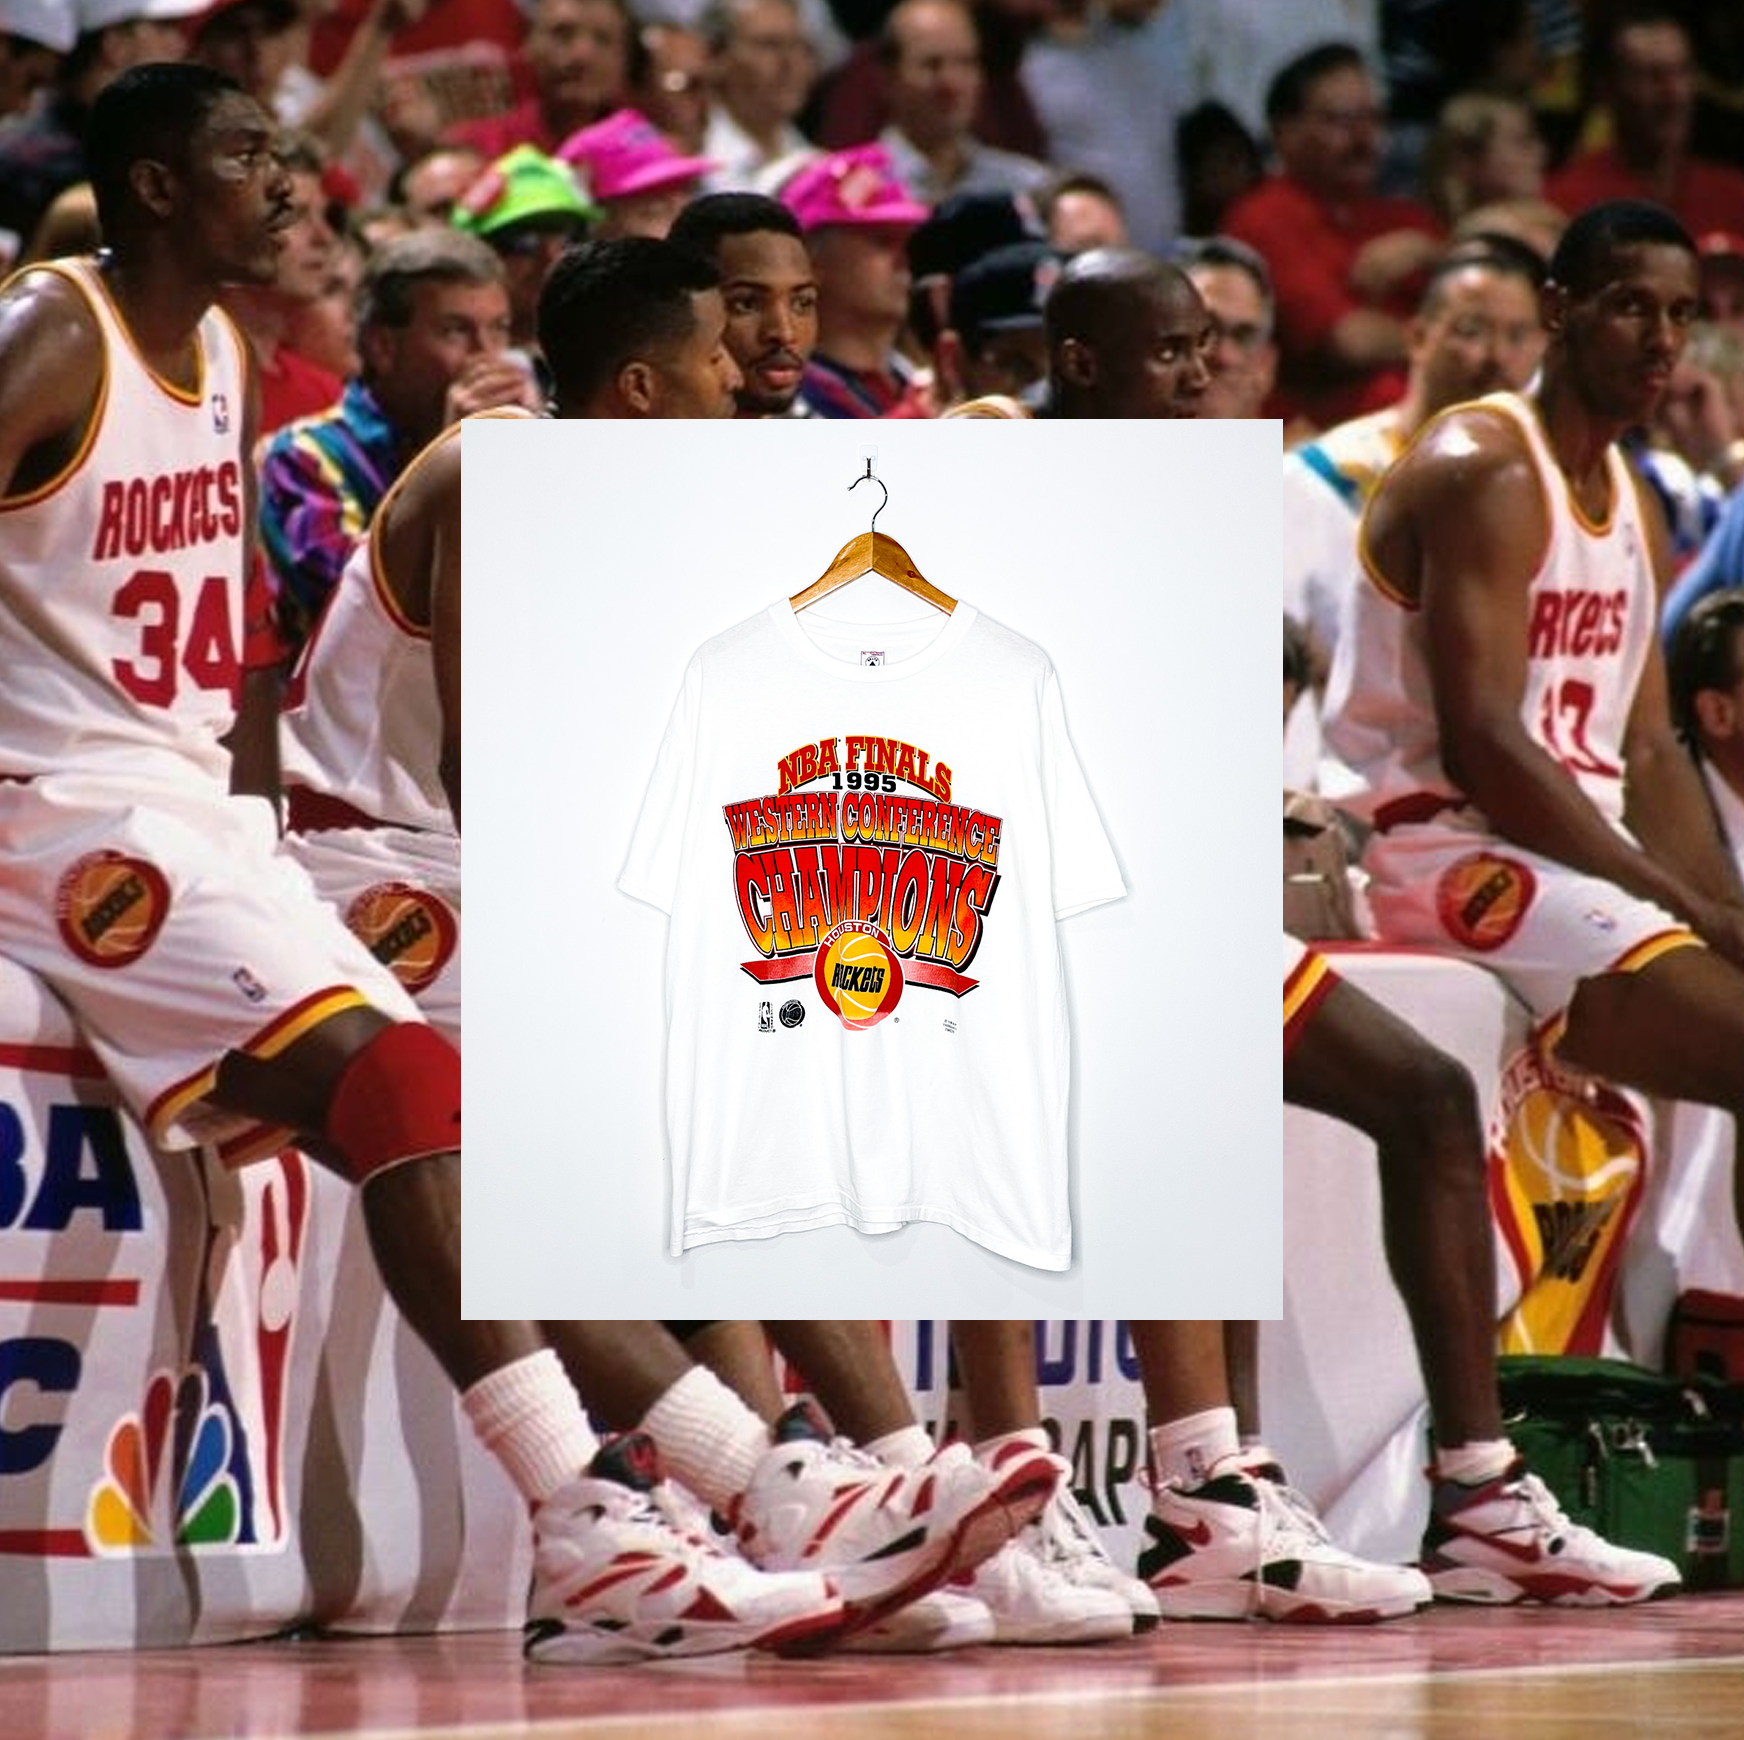 HOUSTON ROCKETS "1994 Western Conference Champions" VINTAGE TEE